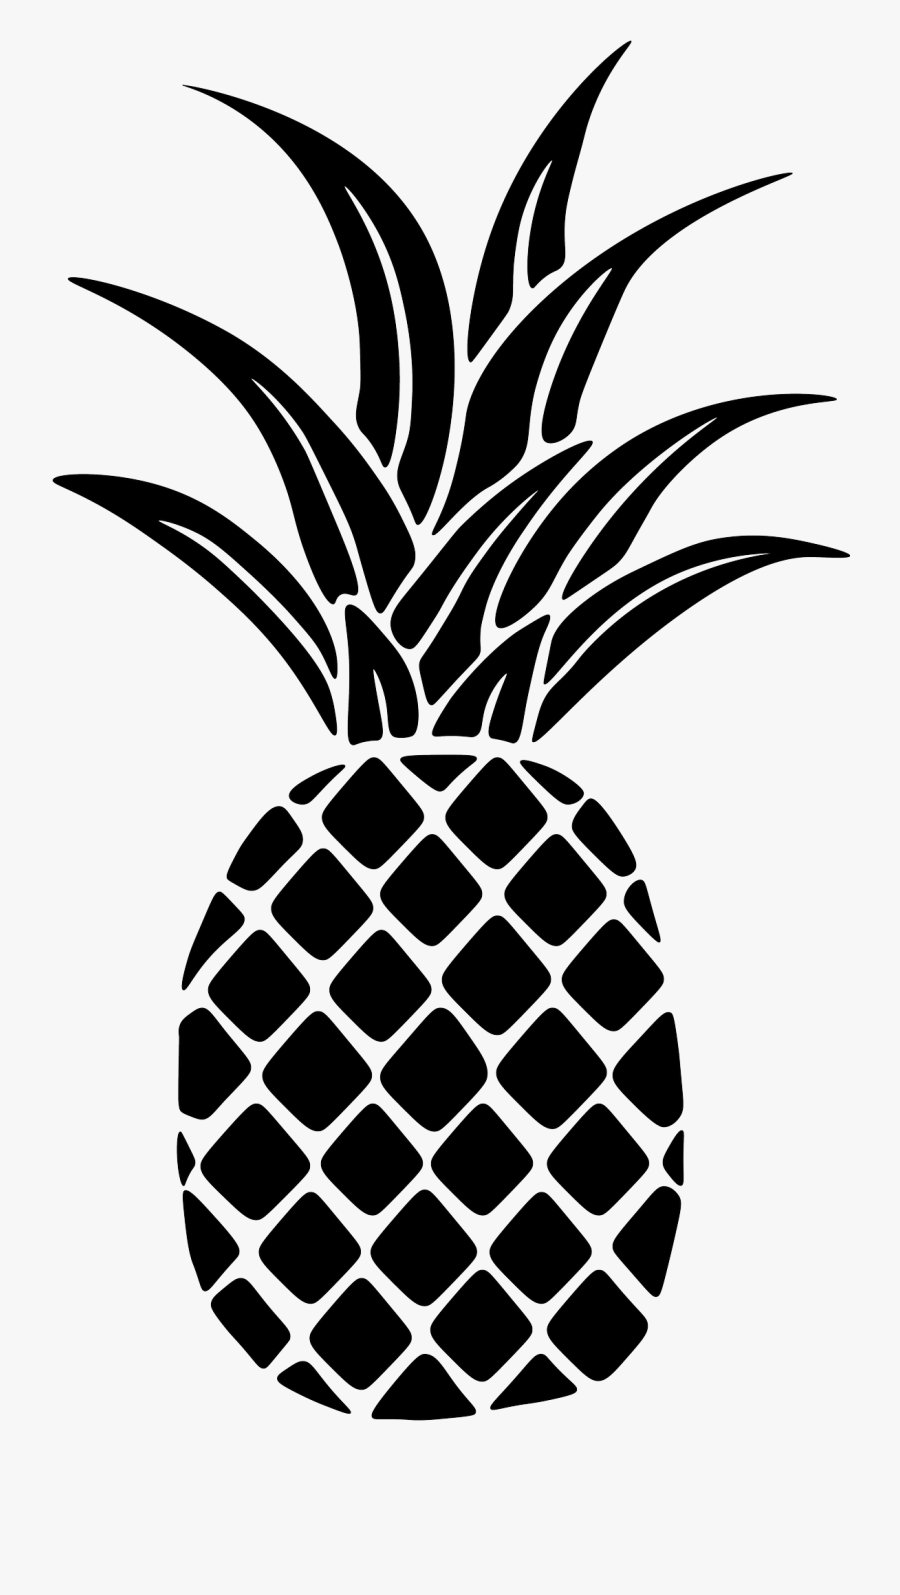 Gold Pineapple Decal, Transparent Clipart